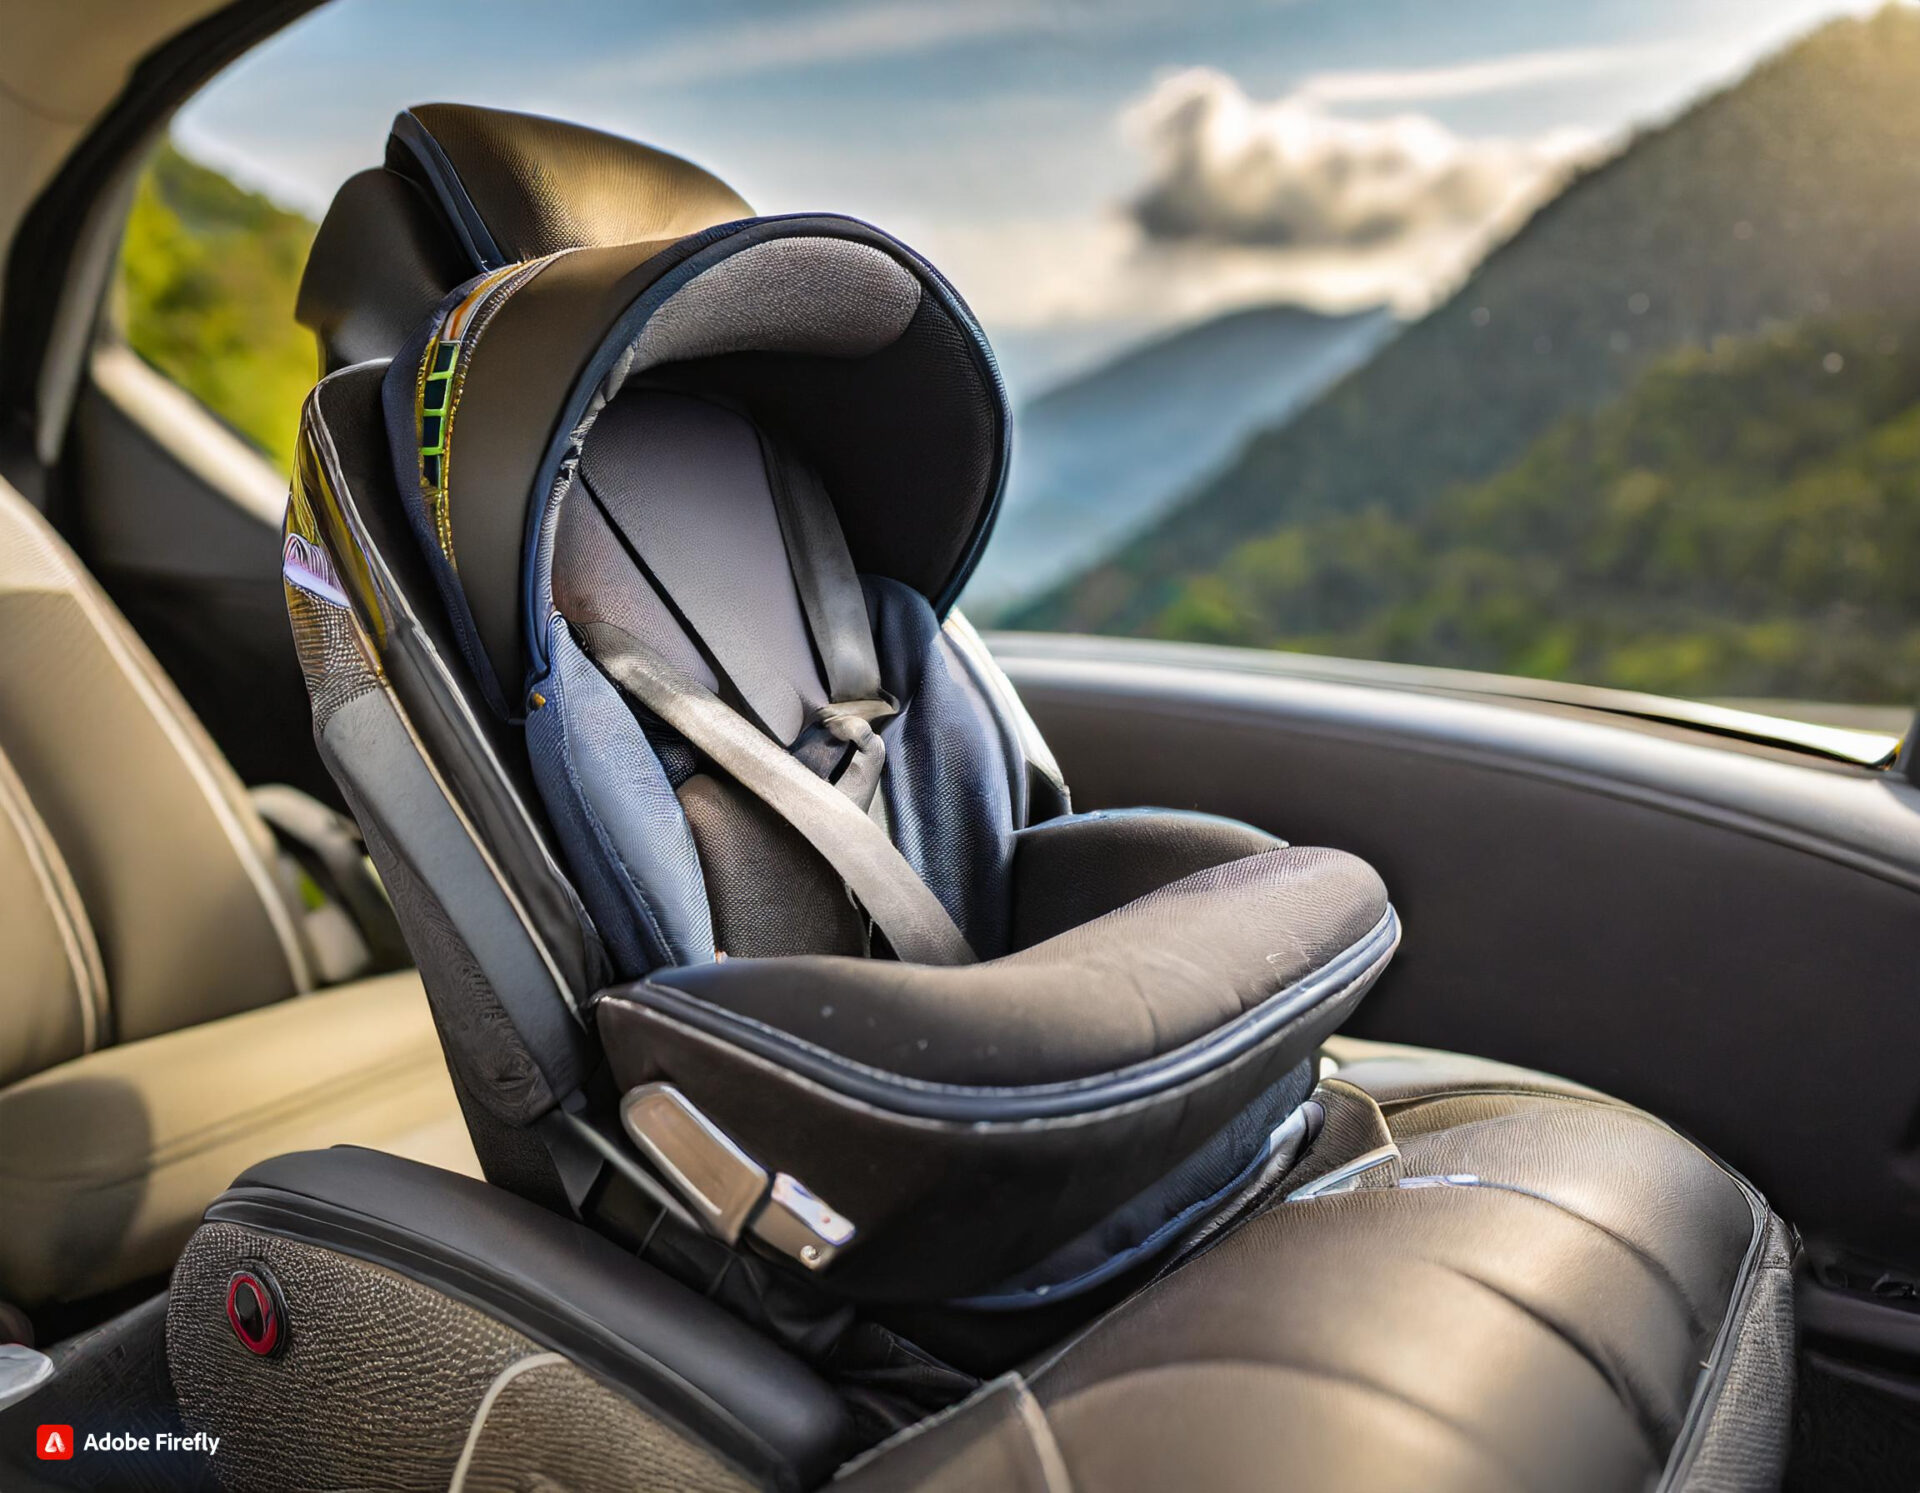 How to Protect Leather Car Seats from Child Car Seats